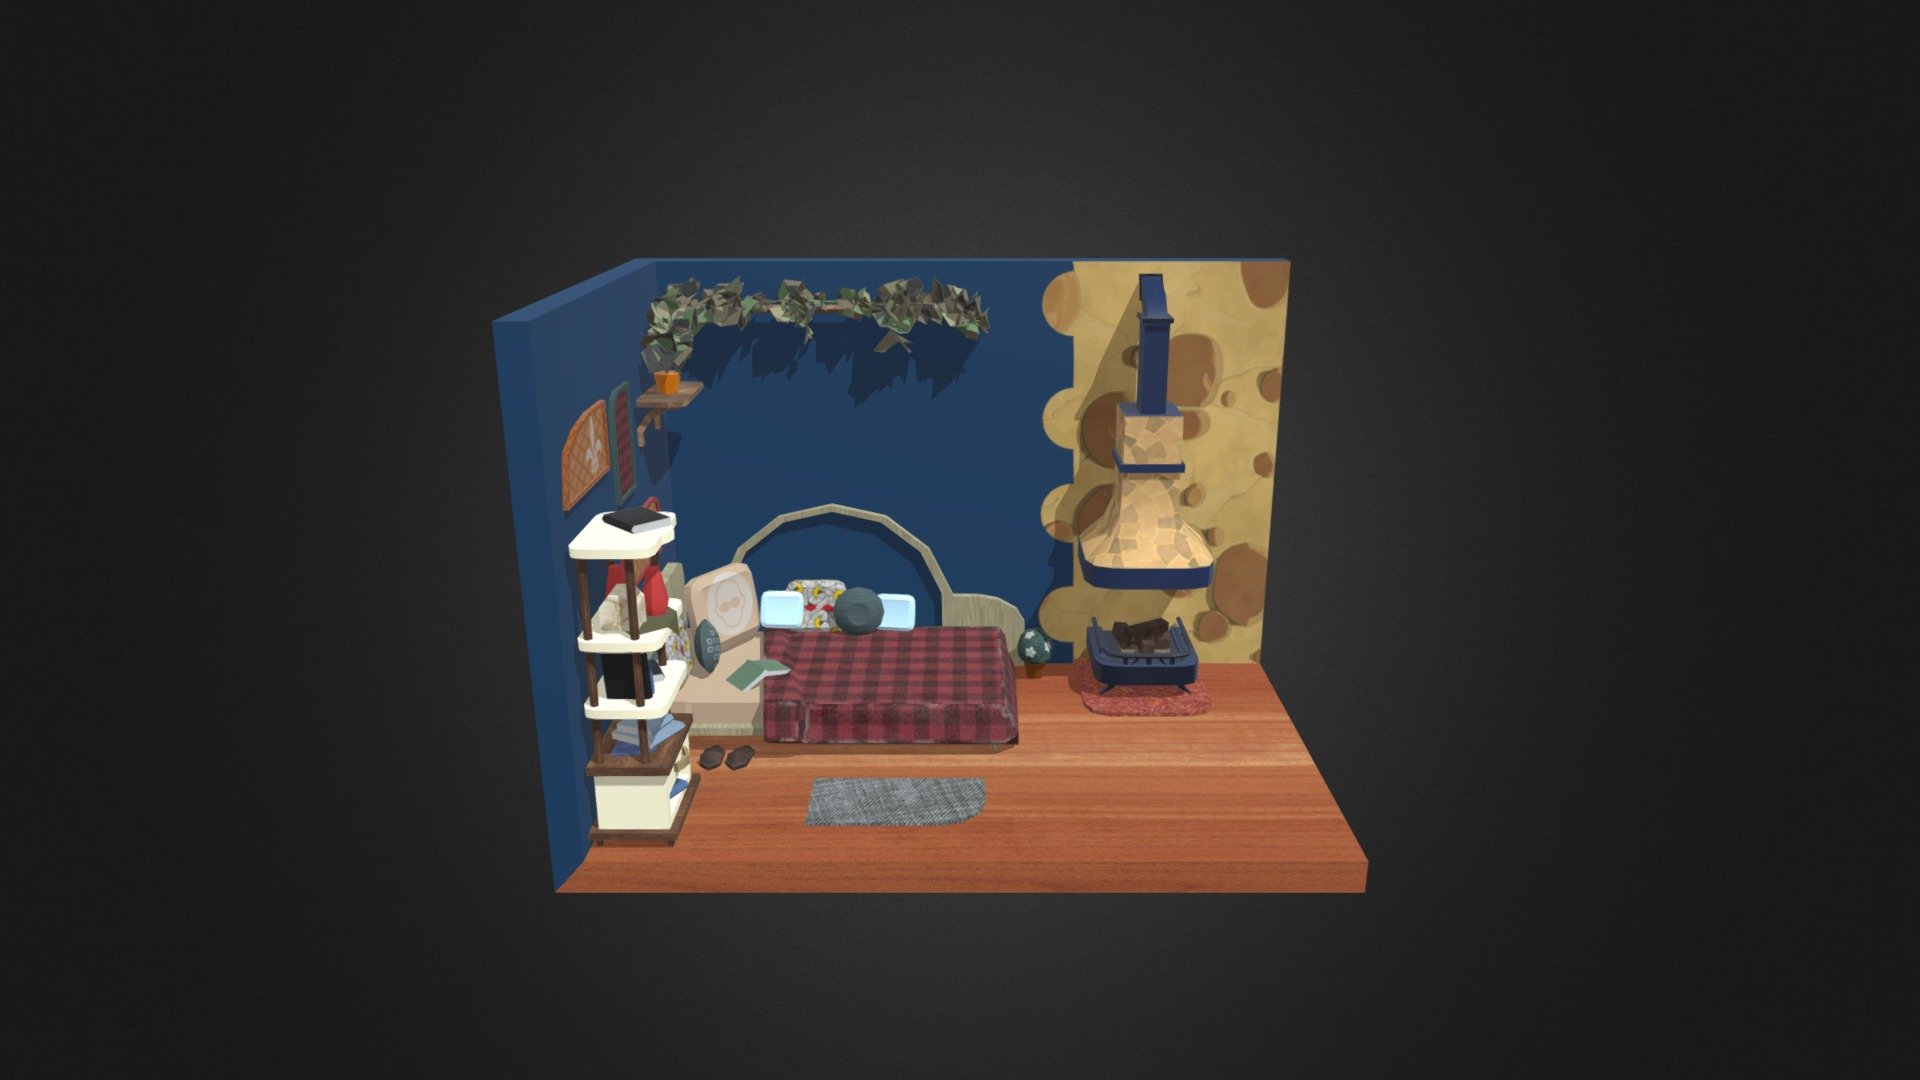 3D Cartoon Room Sample - 3D Cartoon Room Sample - Download Free 3D model by AJevplay 3d model